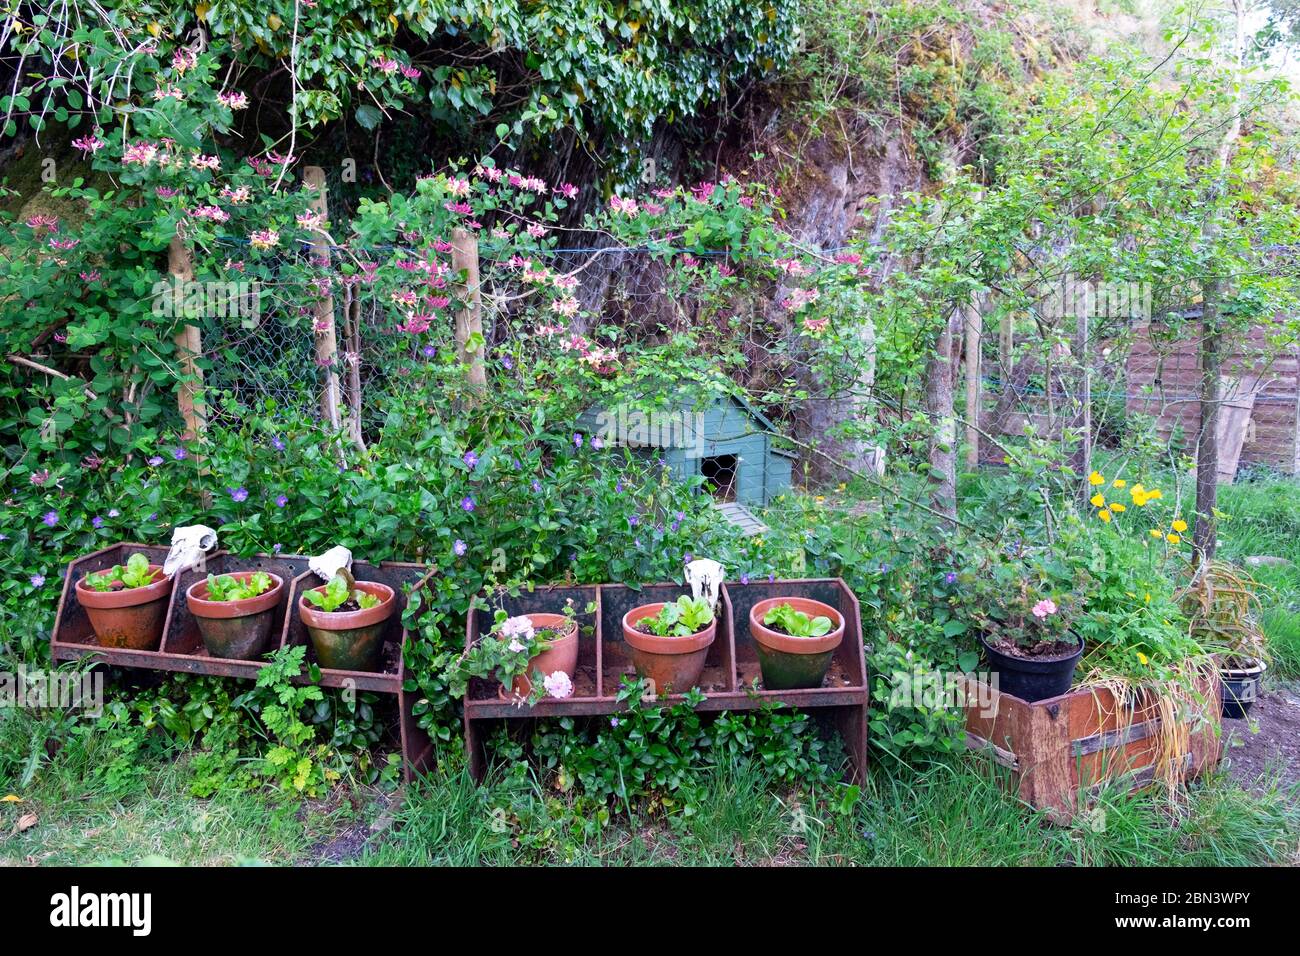 Lettuce growing in a row of terra cotta pots on old agricultural stand in a country garden with honeysuckle on fence Wales UK KATHY DEWITT Stock Photo